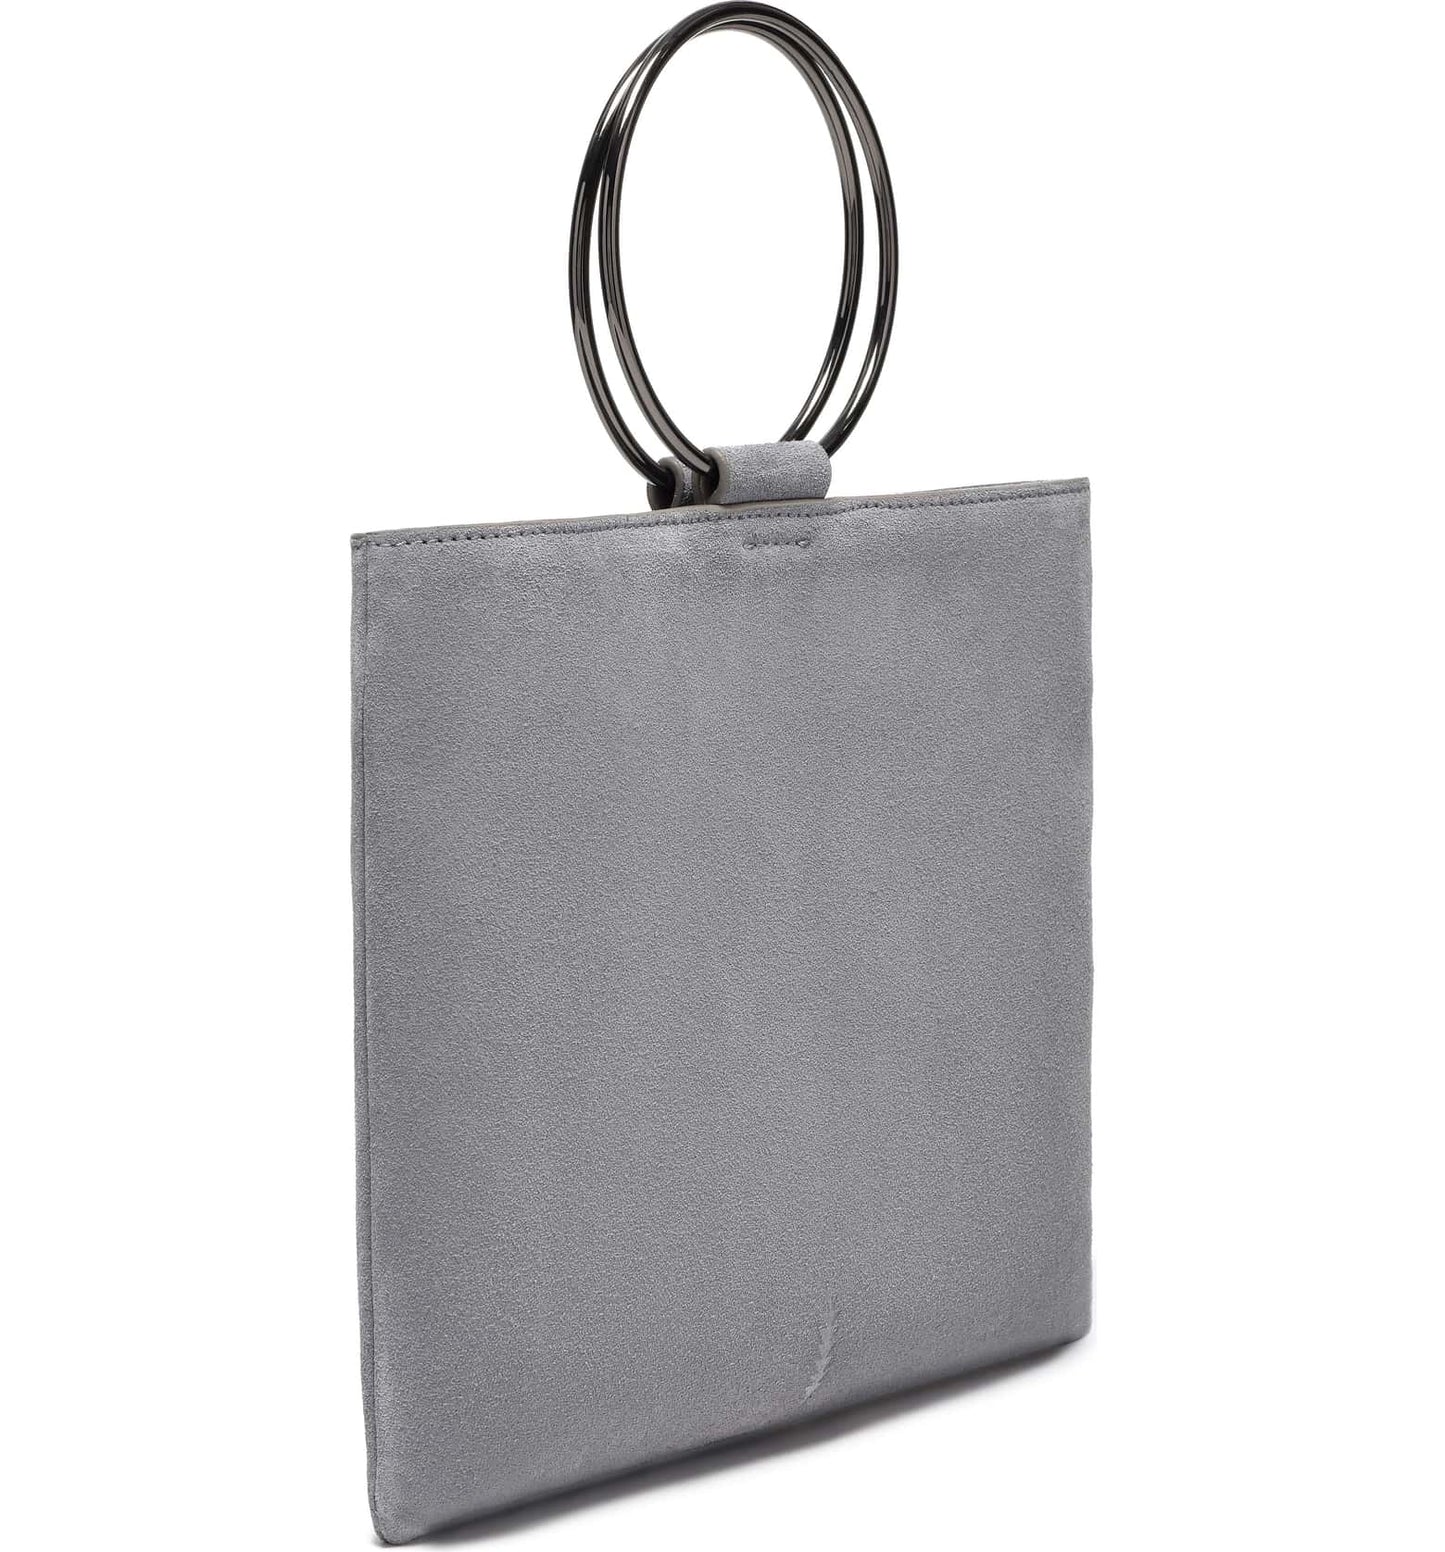 Thacker Le Pouch- Grey Suede